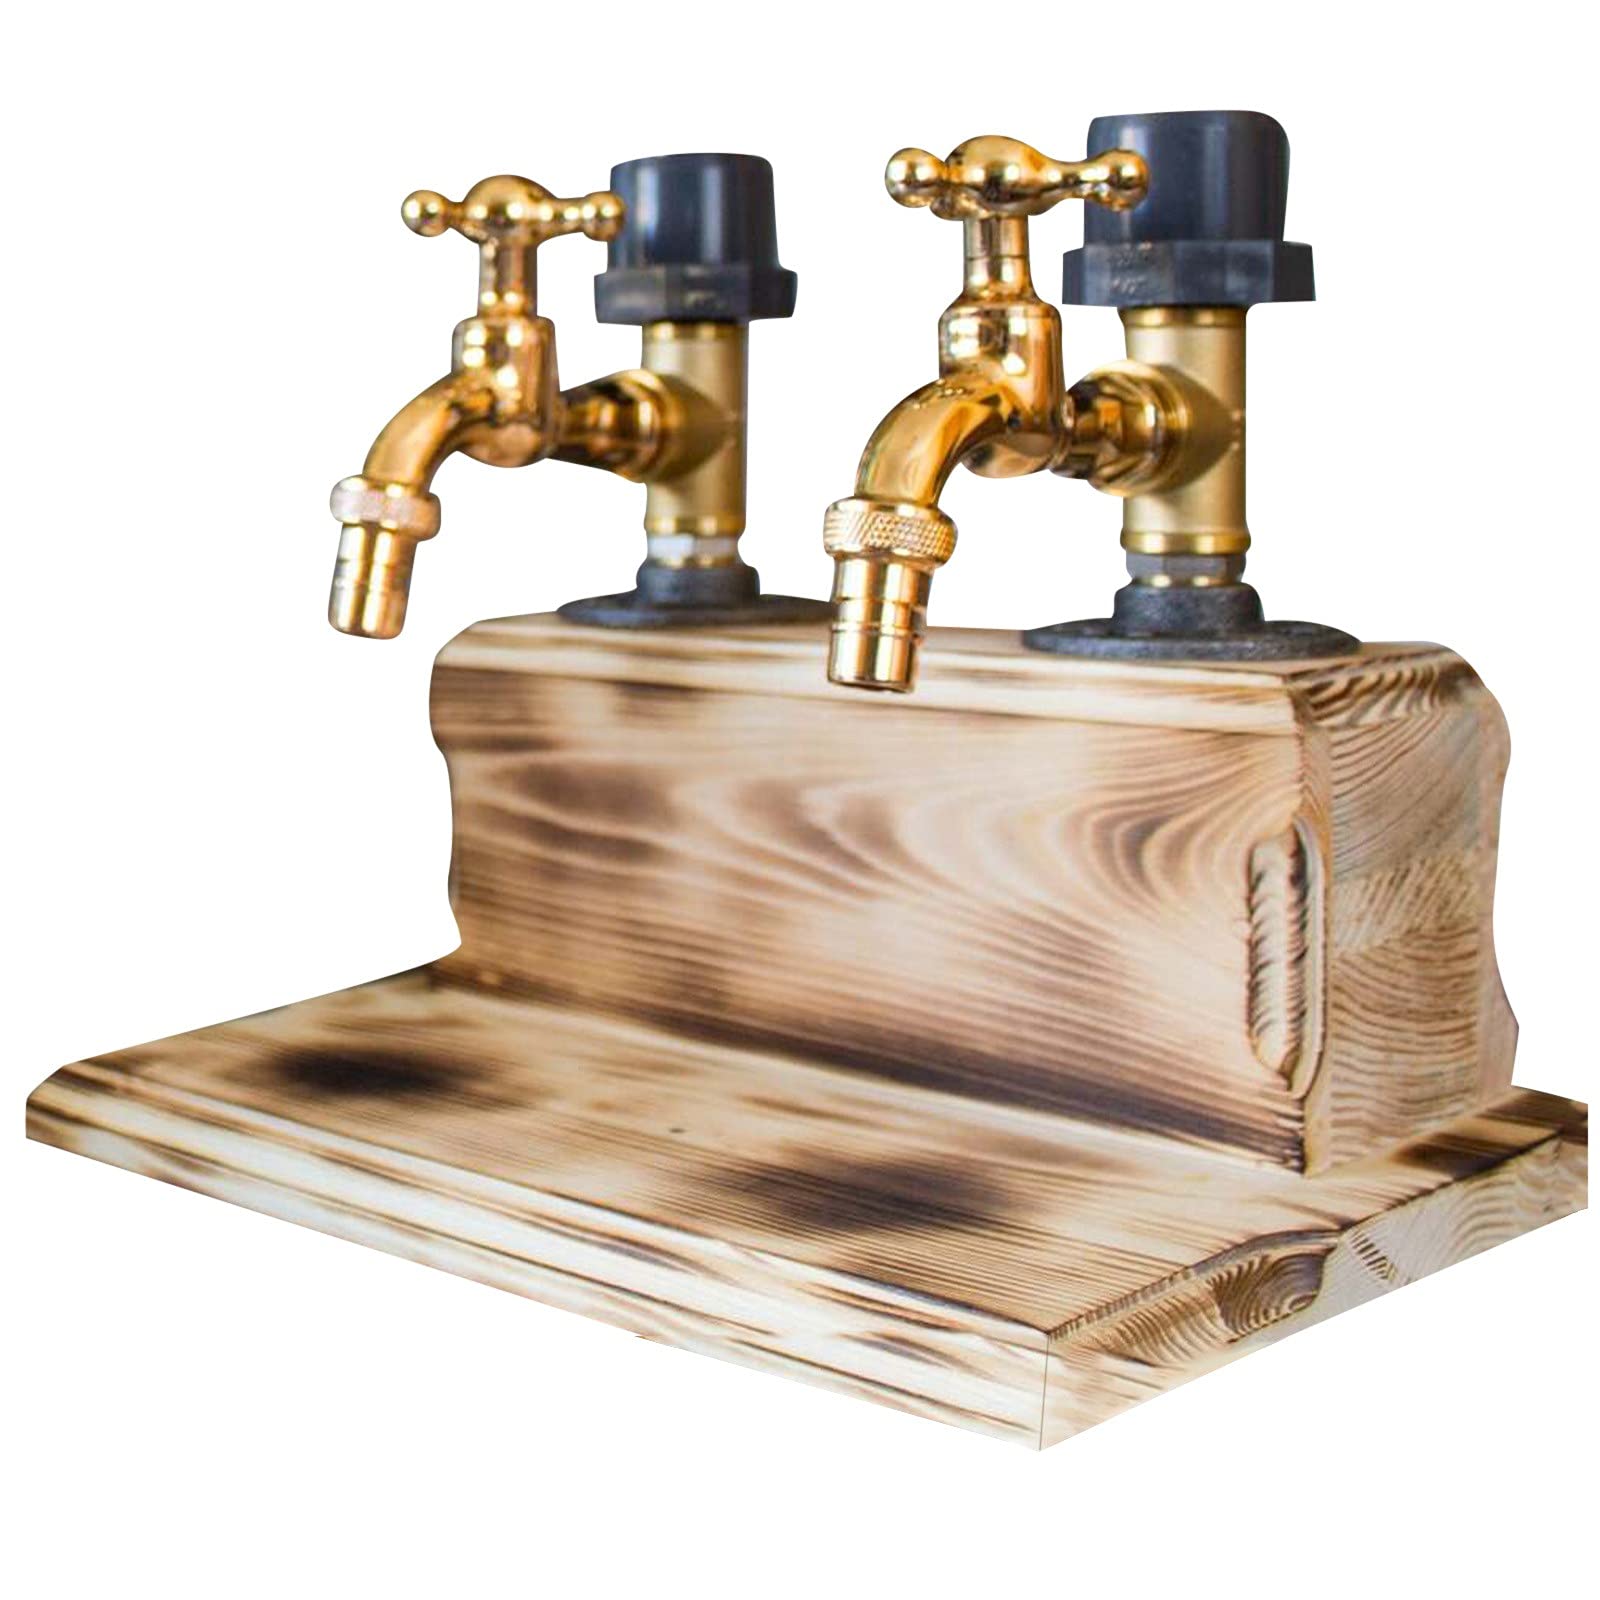 Xirudory Whiskey wood Dispenser,Fathers Day Liquor Alcohol Whiskey Wood Dispenser Faucet Shape for Party Dinner Bars and Beverage Stations (02 Double)